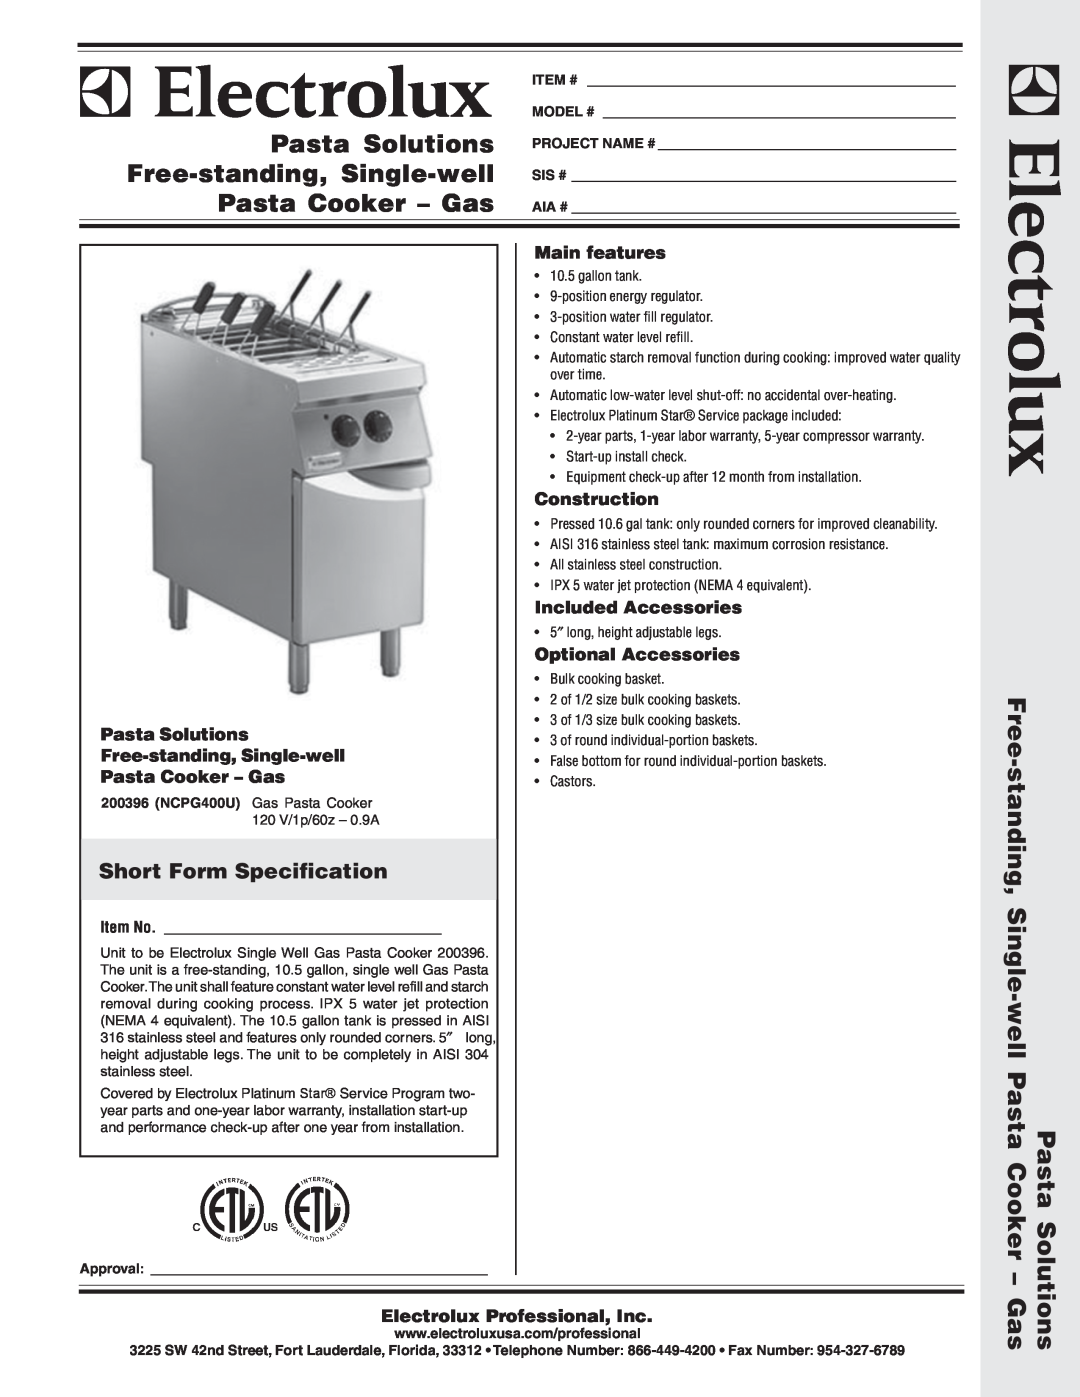 Electrolux 200396 (NCPG400U) warranty Short Form Specification, Solutions - Gas, Pasta Cooker - Gas, Main features 